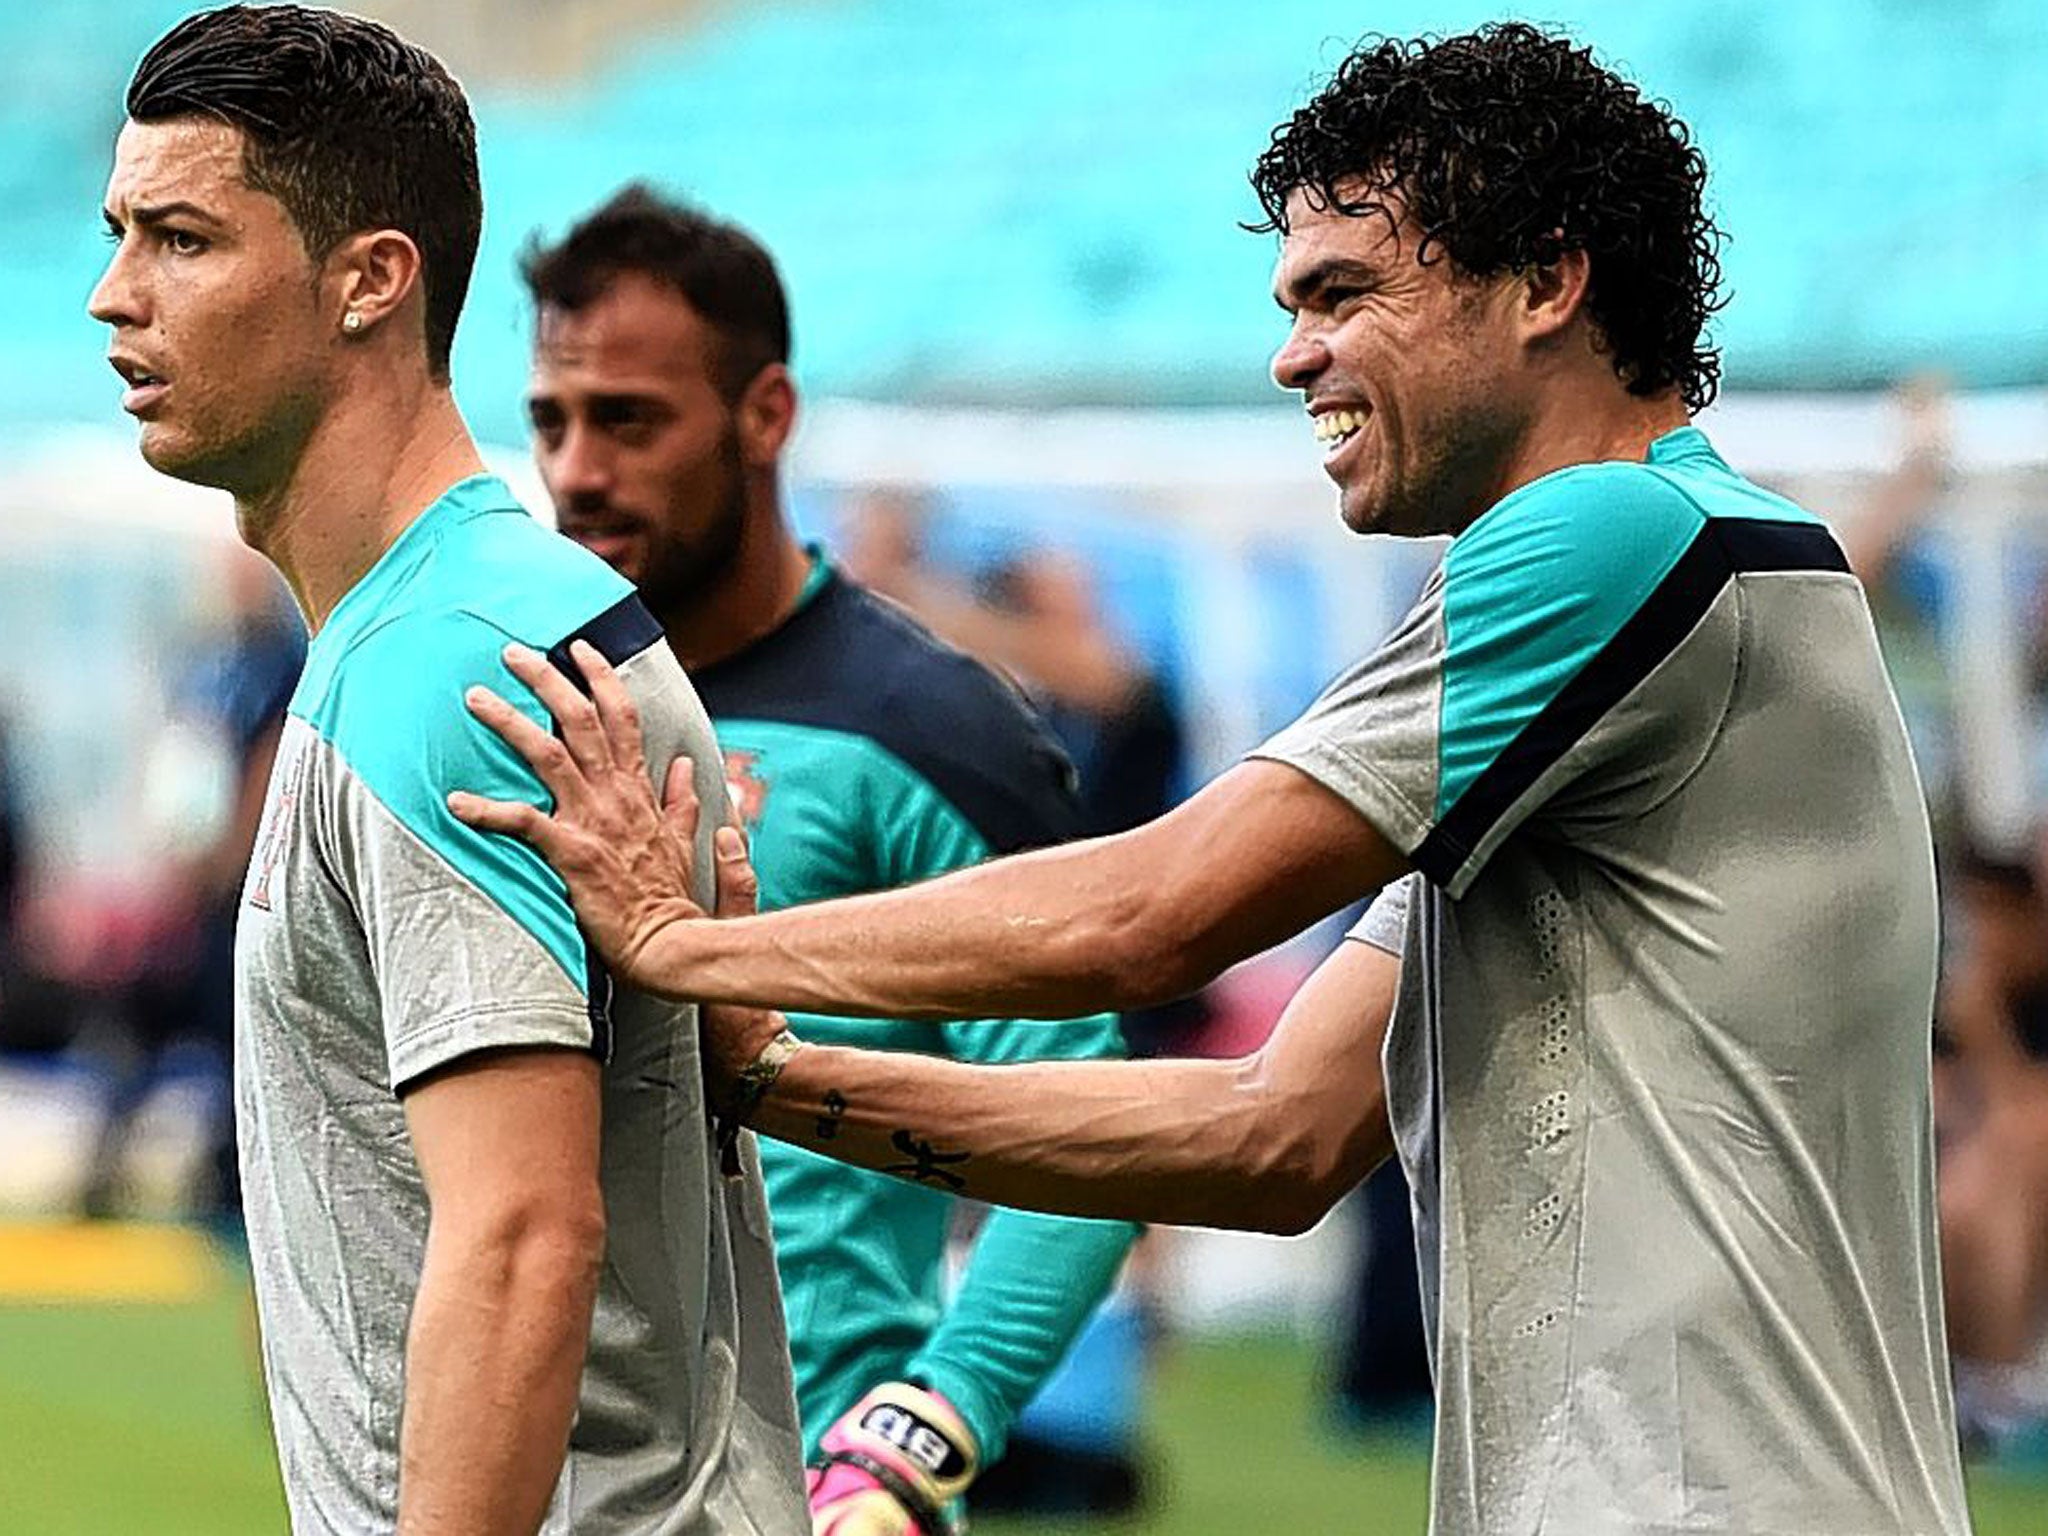 Cristiano Ronaldo is given a friendly shove by Pepe during training in Salvador